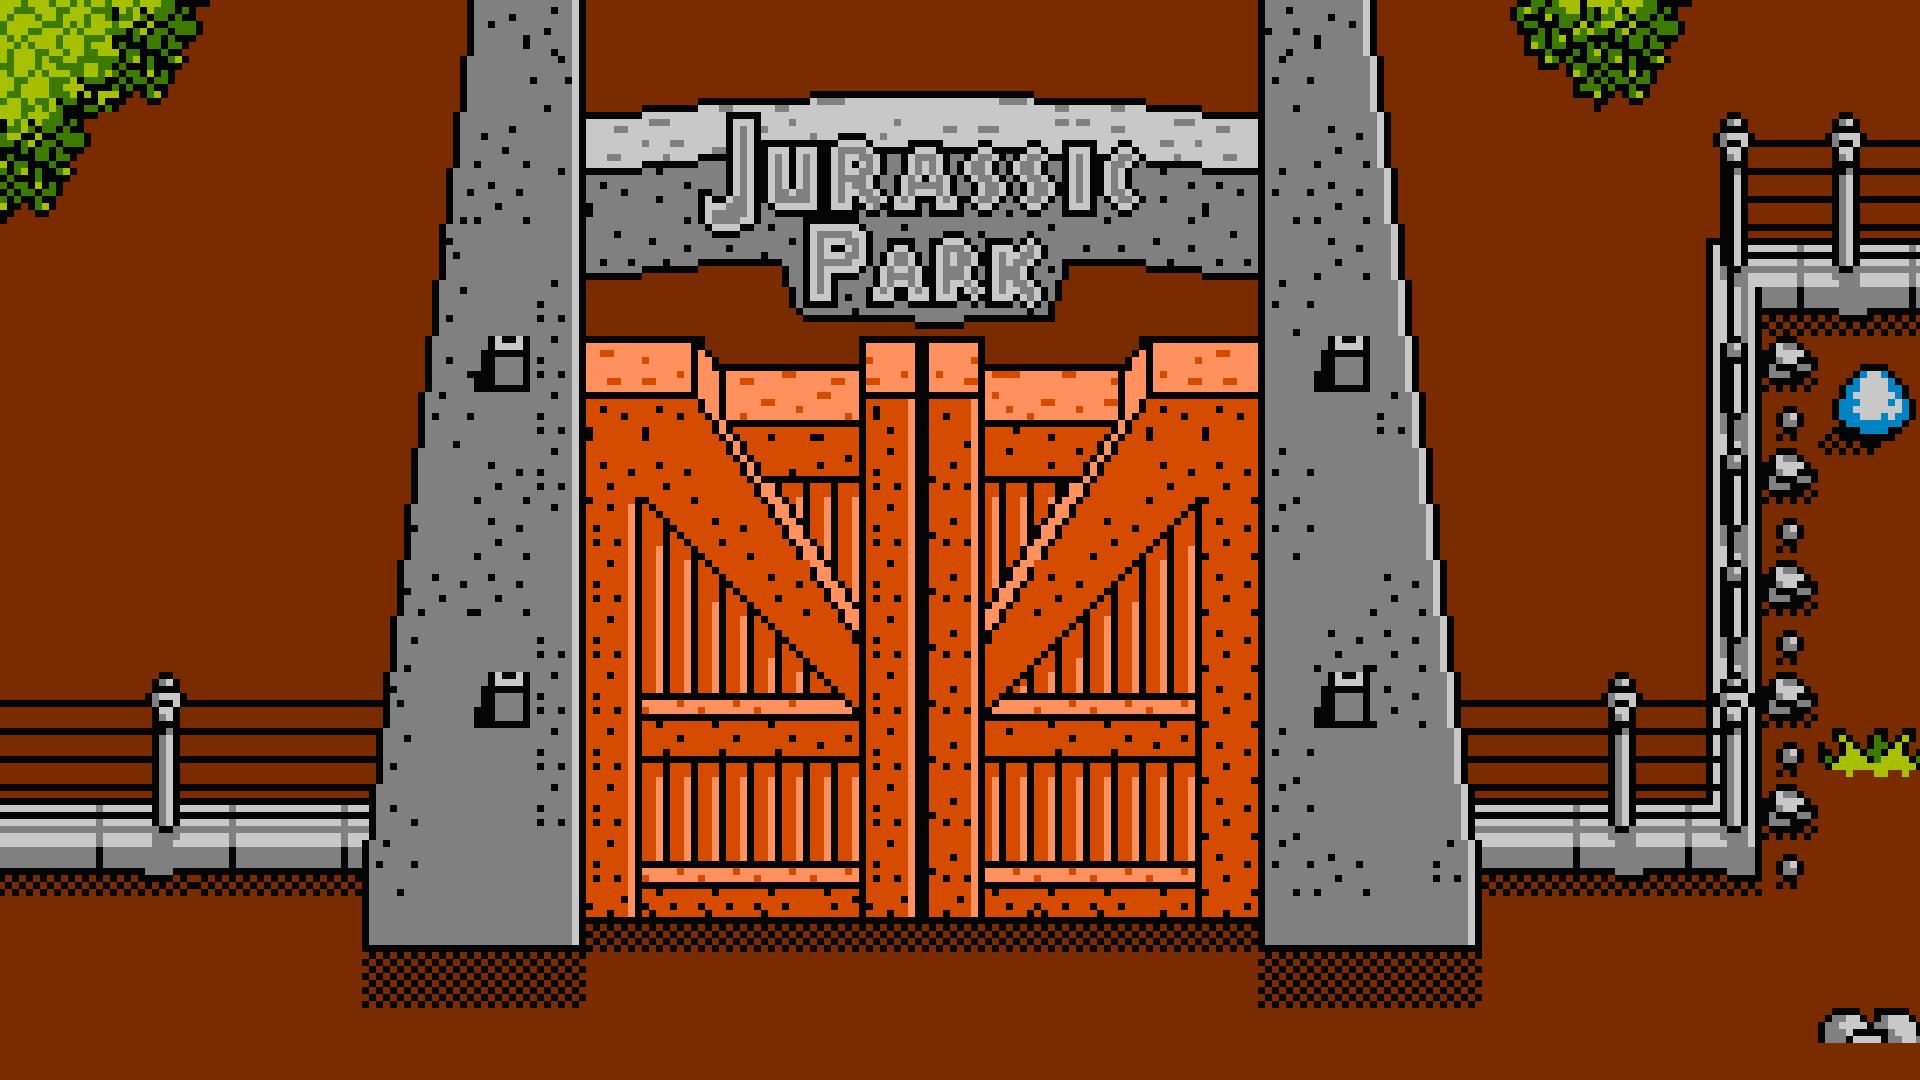 Jurassic Park 8-BIT: Complete The Game